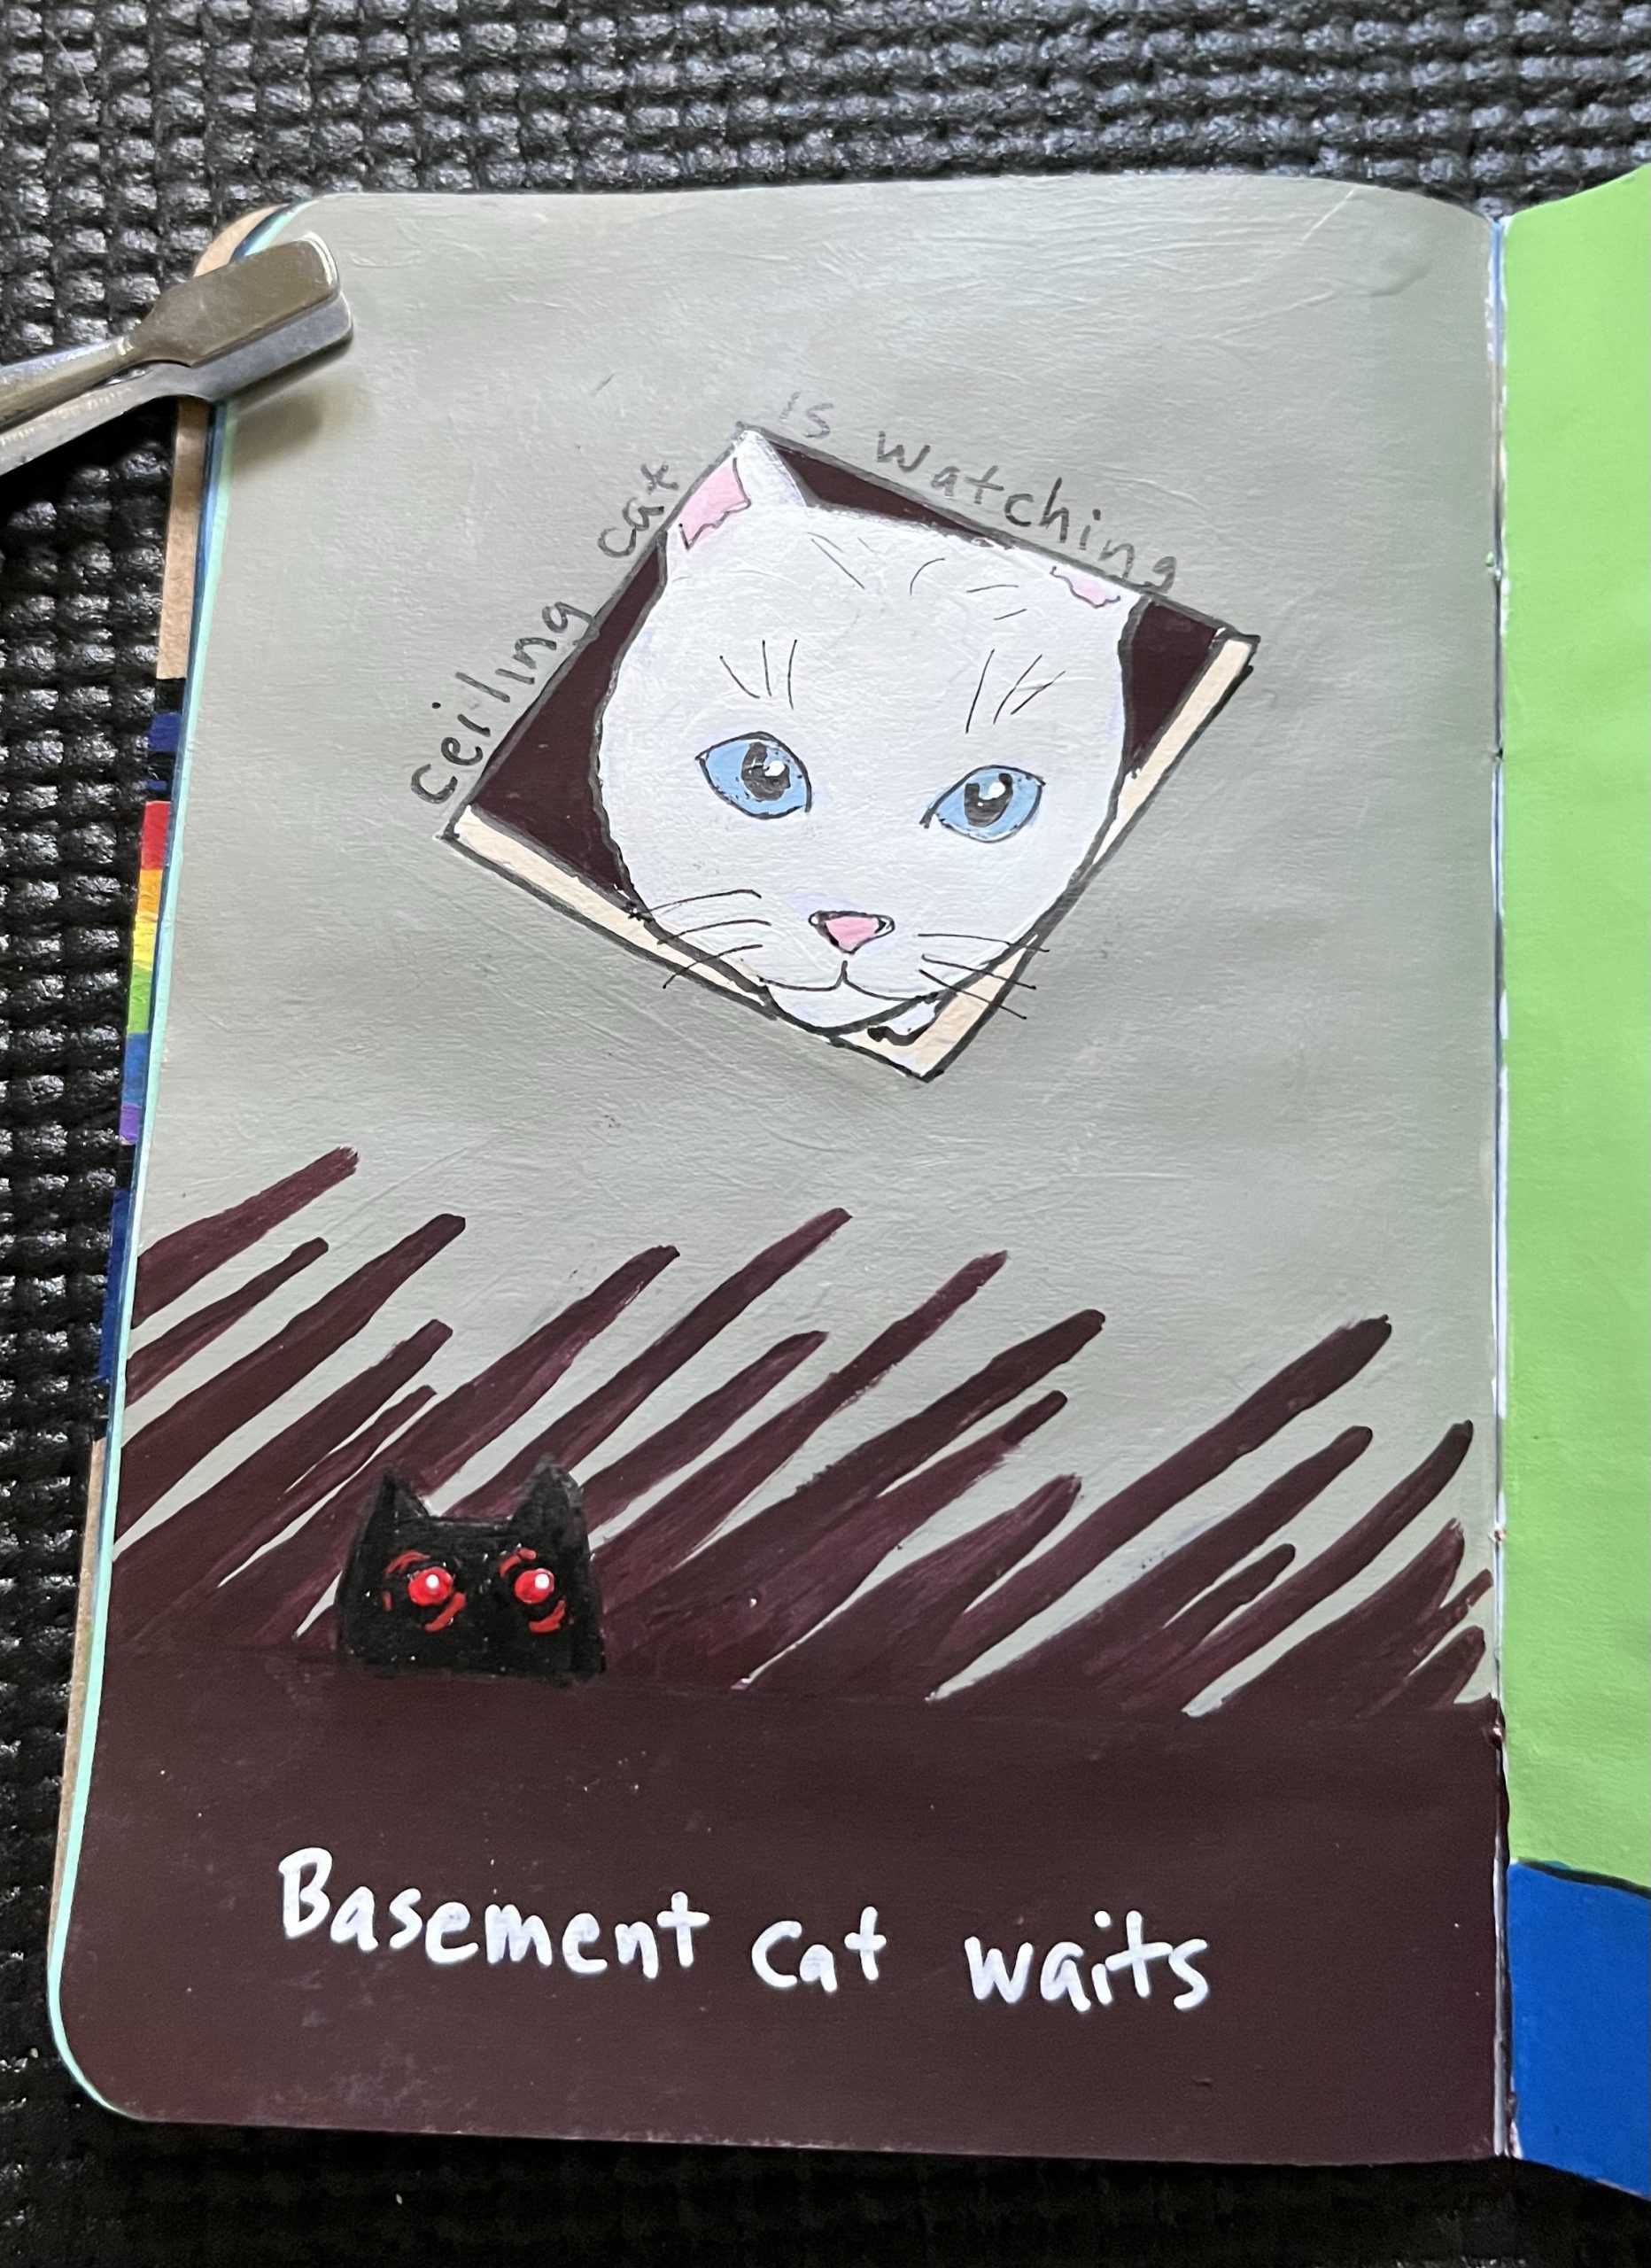 A painted benevolent white cat, pokes his head through a hole in the ceiling. A painted black cat with red eyes, stalks from below